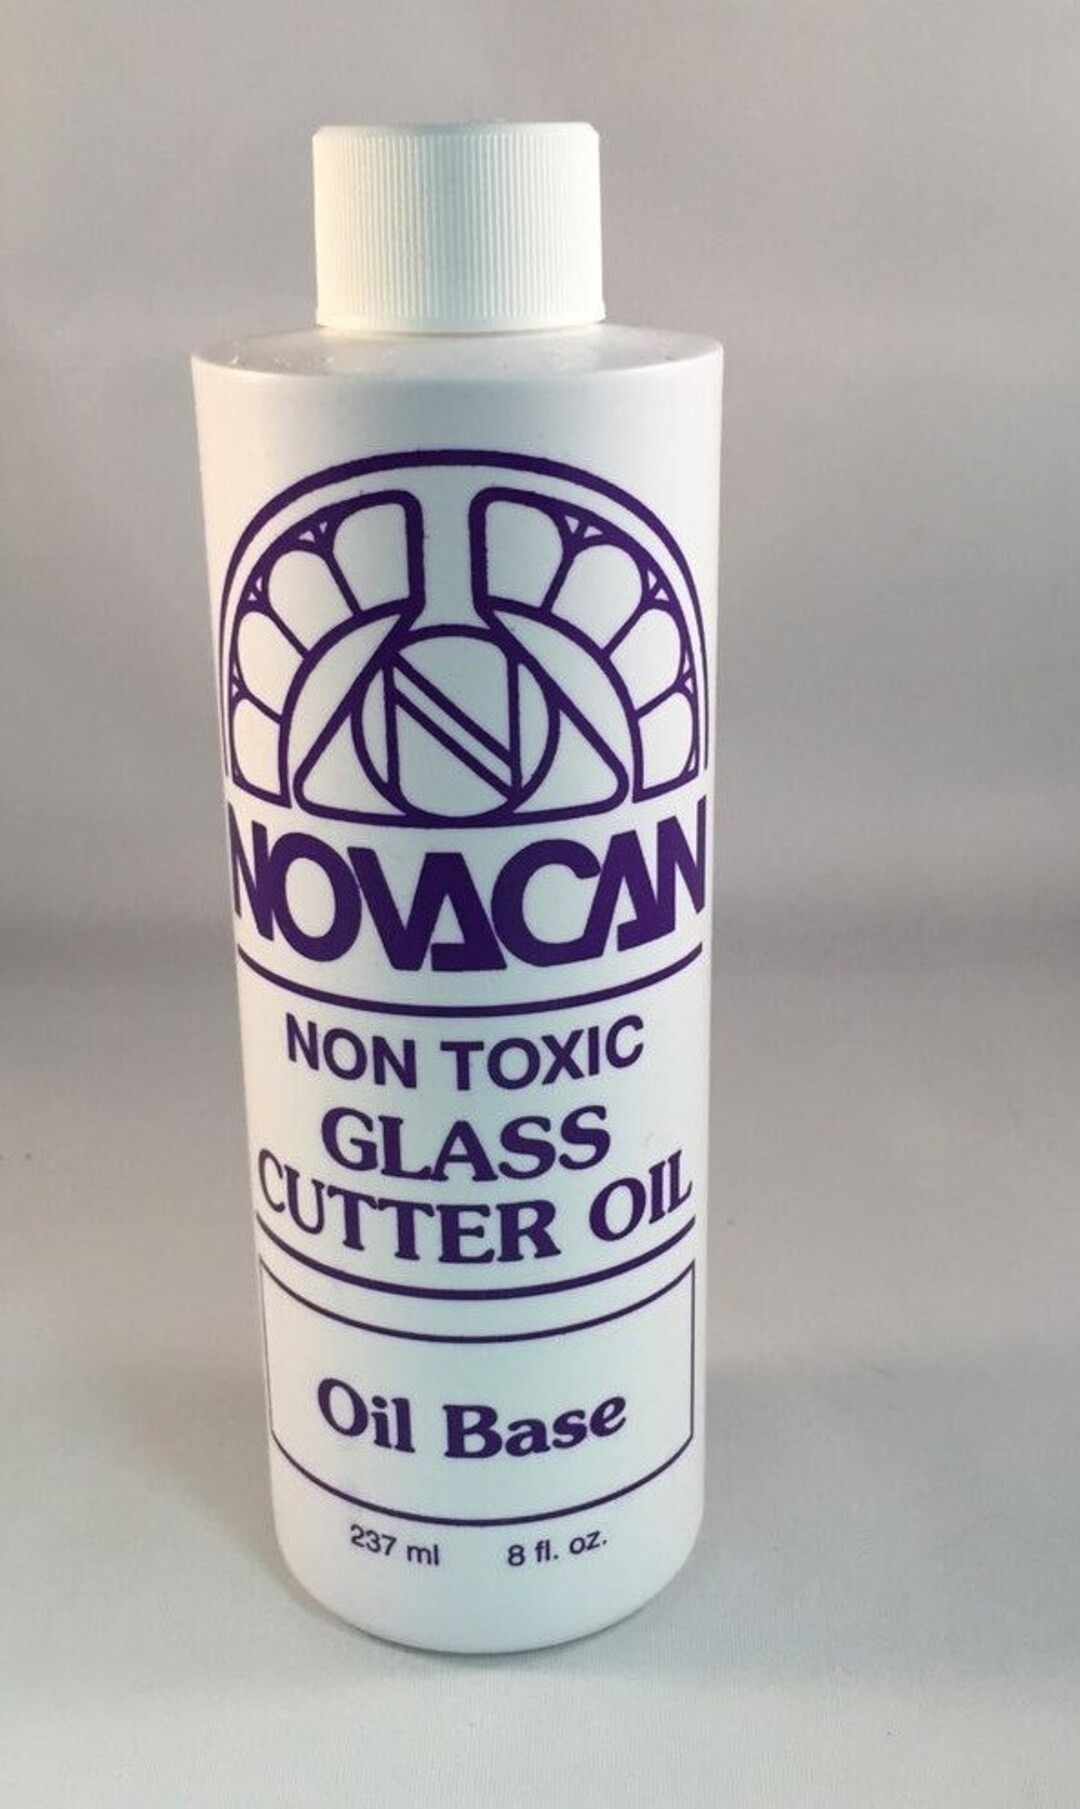 Cutting Oil for Glass Cutters by Novacan, Nontoxic, Oil Based, 8 Oz